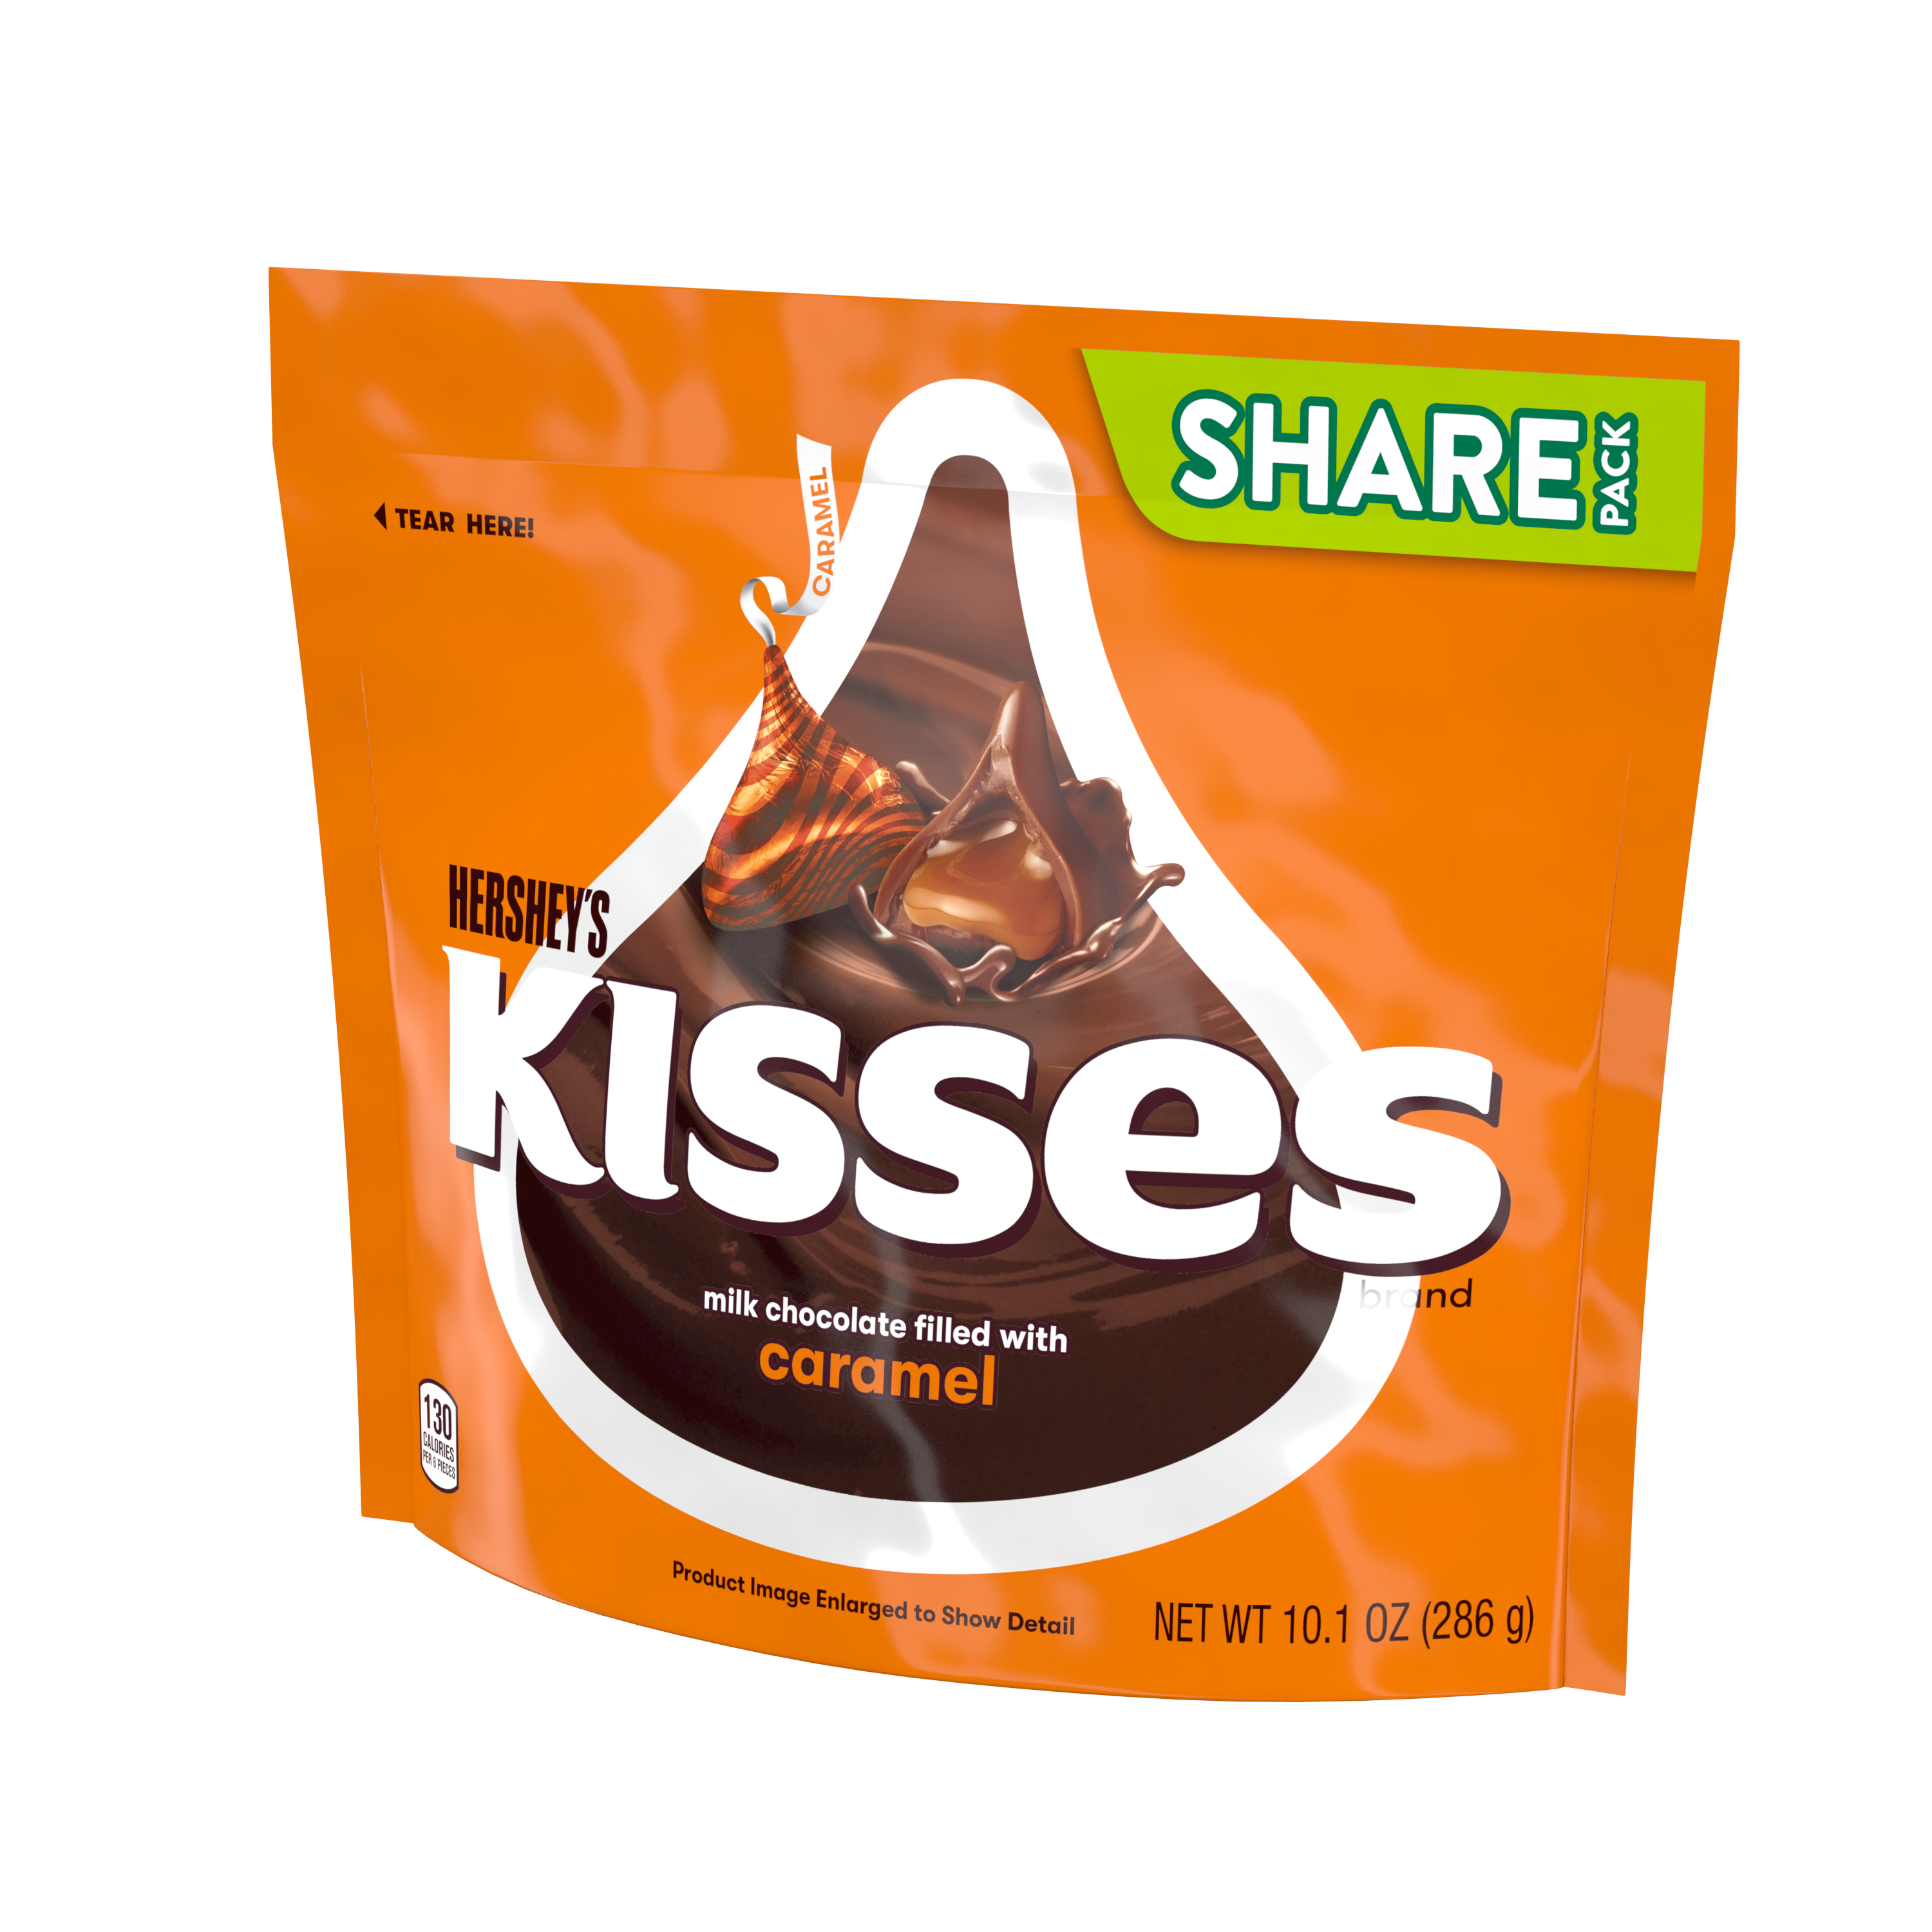 HERSHEY'S KISSES Milk Chocolate Filled with Caramel Candy, 10.1 oz pack - Right Side of Package